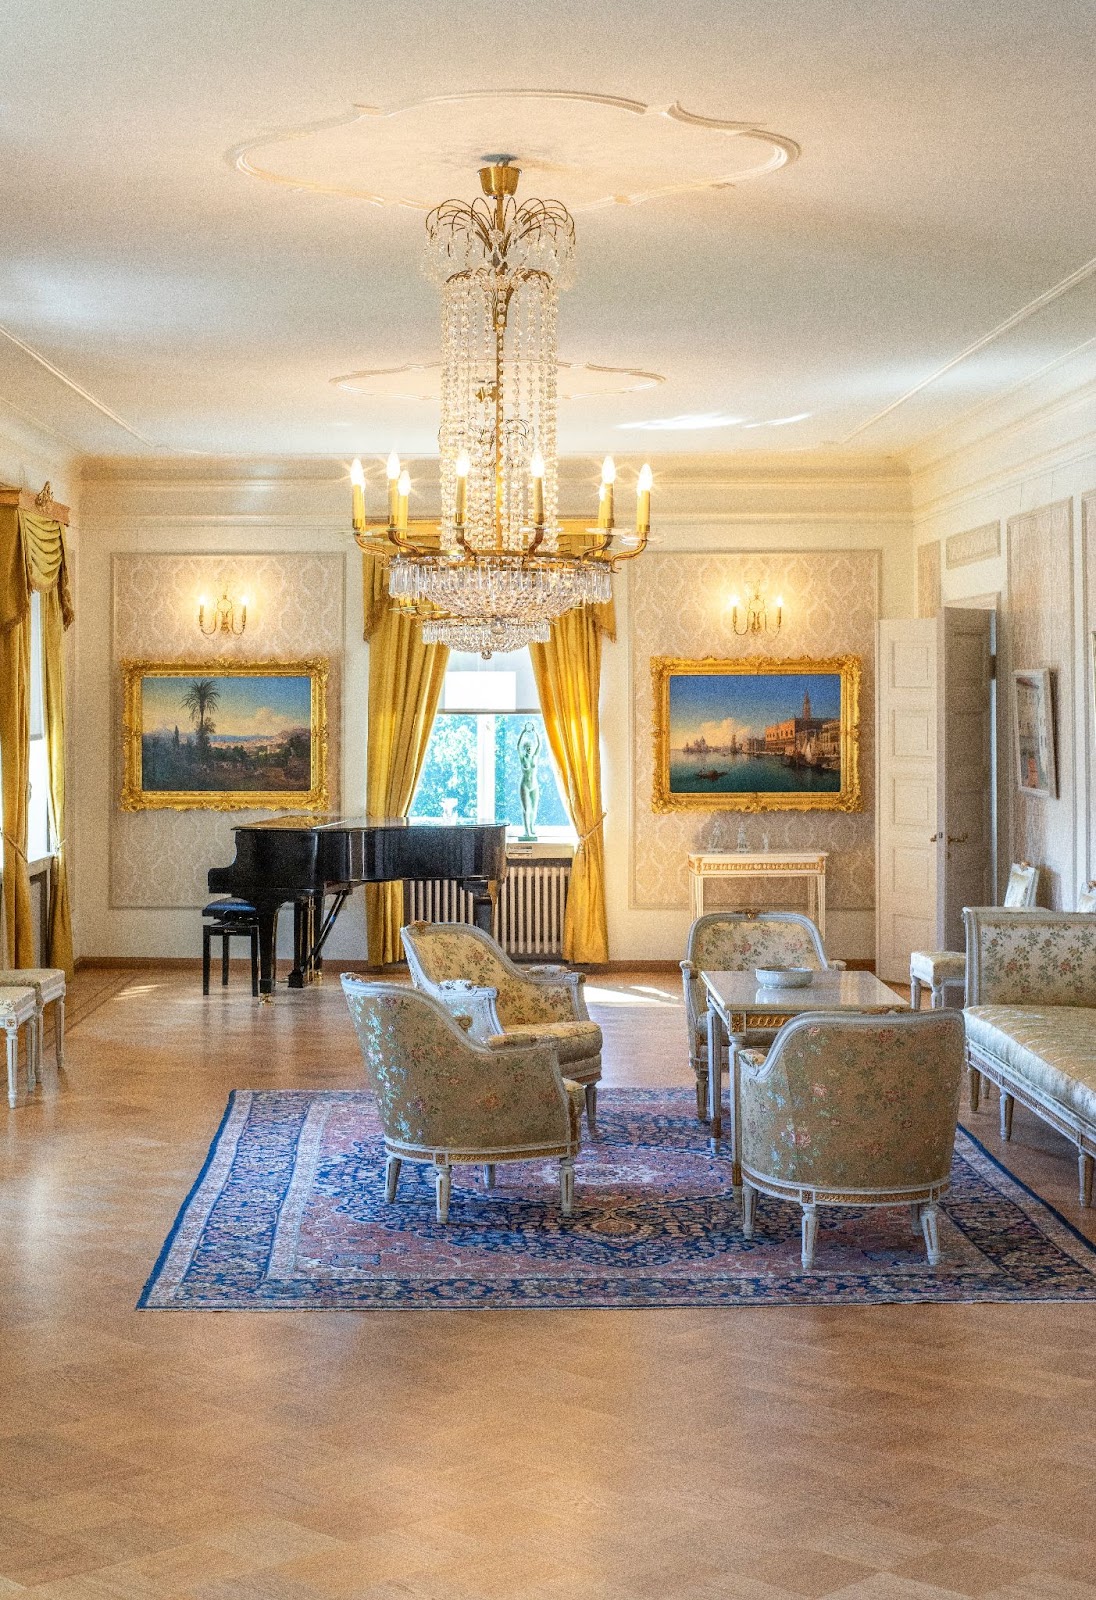 Expensive paintings hung in an elegant home